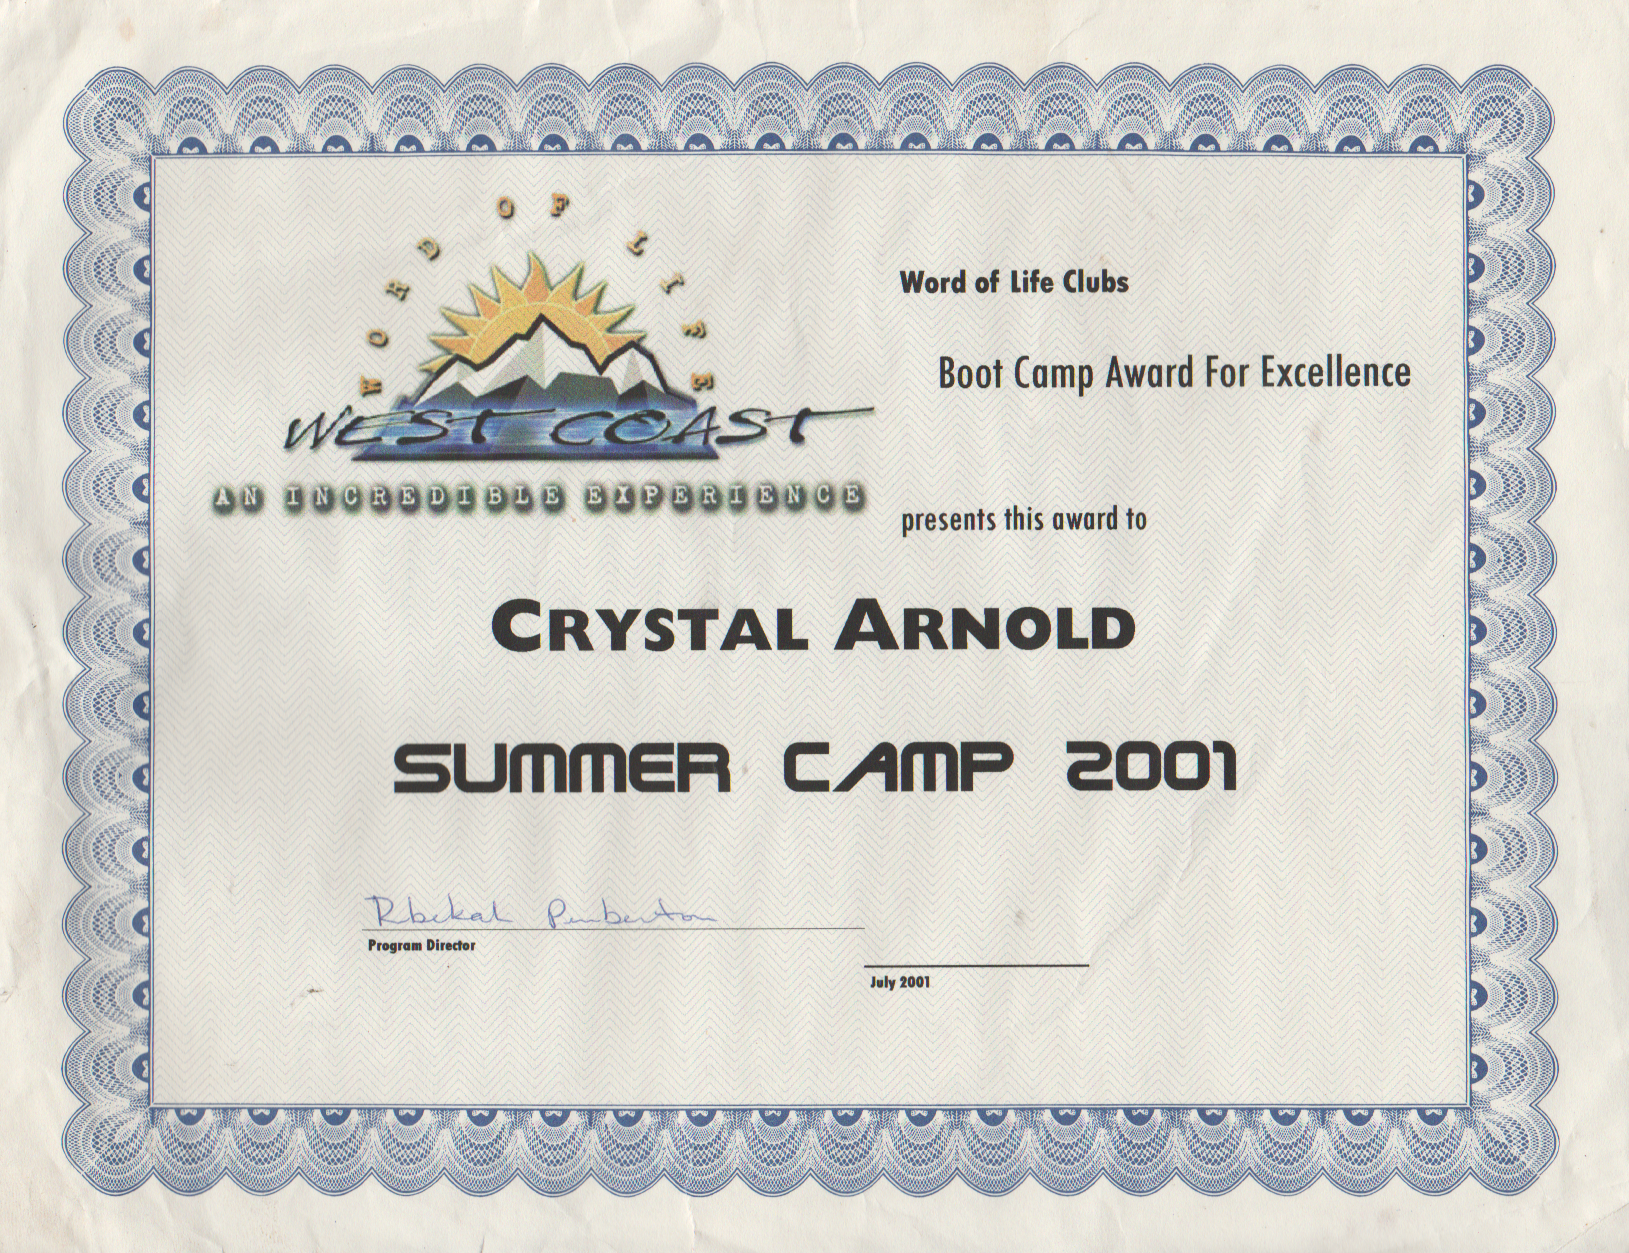 2001-07 - West Coast Camp, Boot Camp Award For Excellence, Crystal Arnold.png